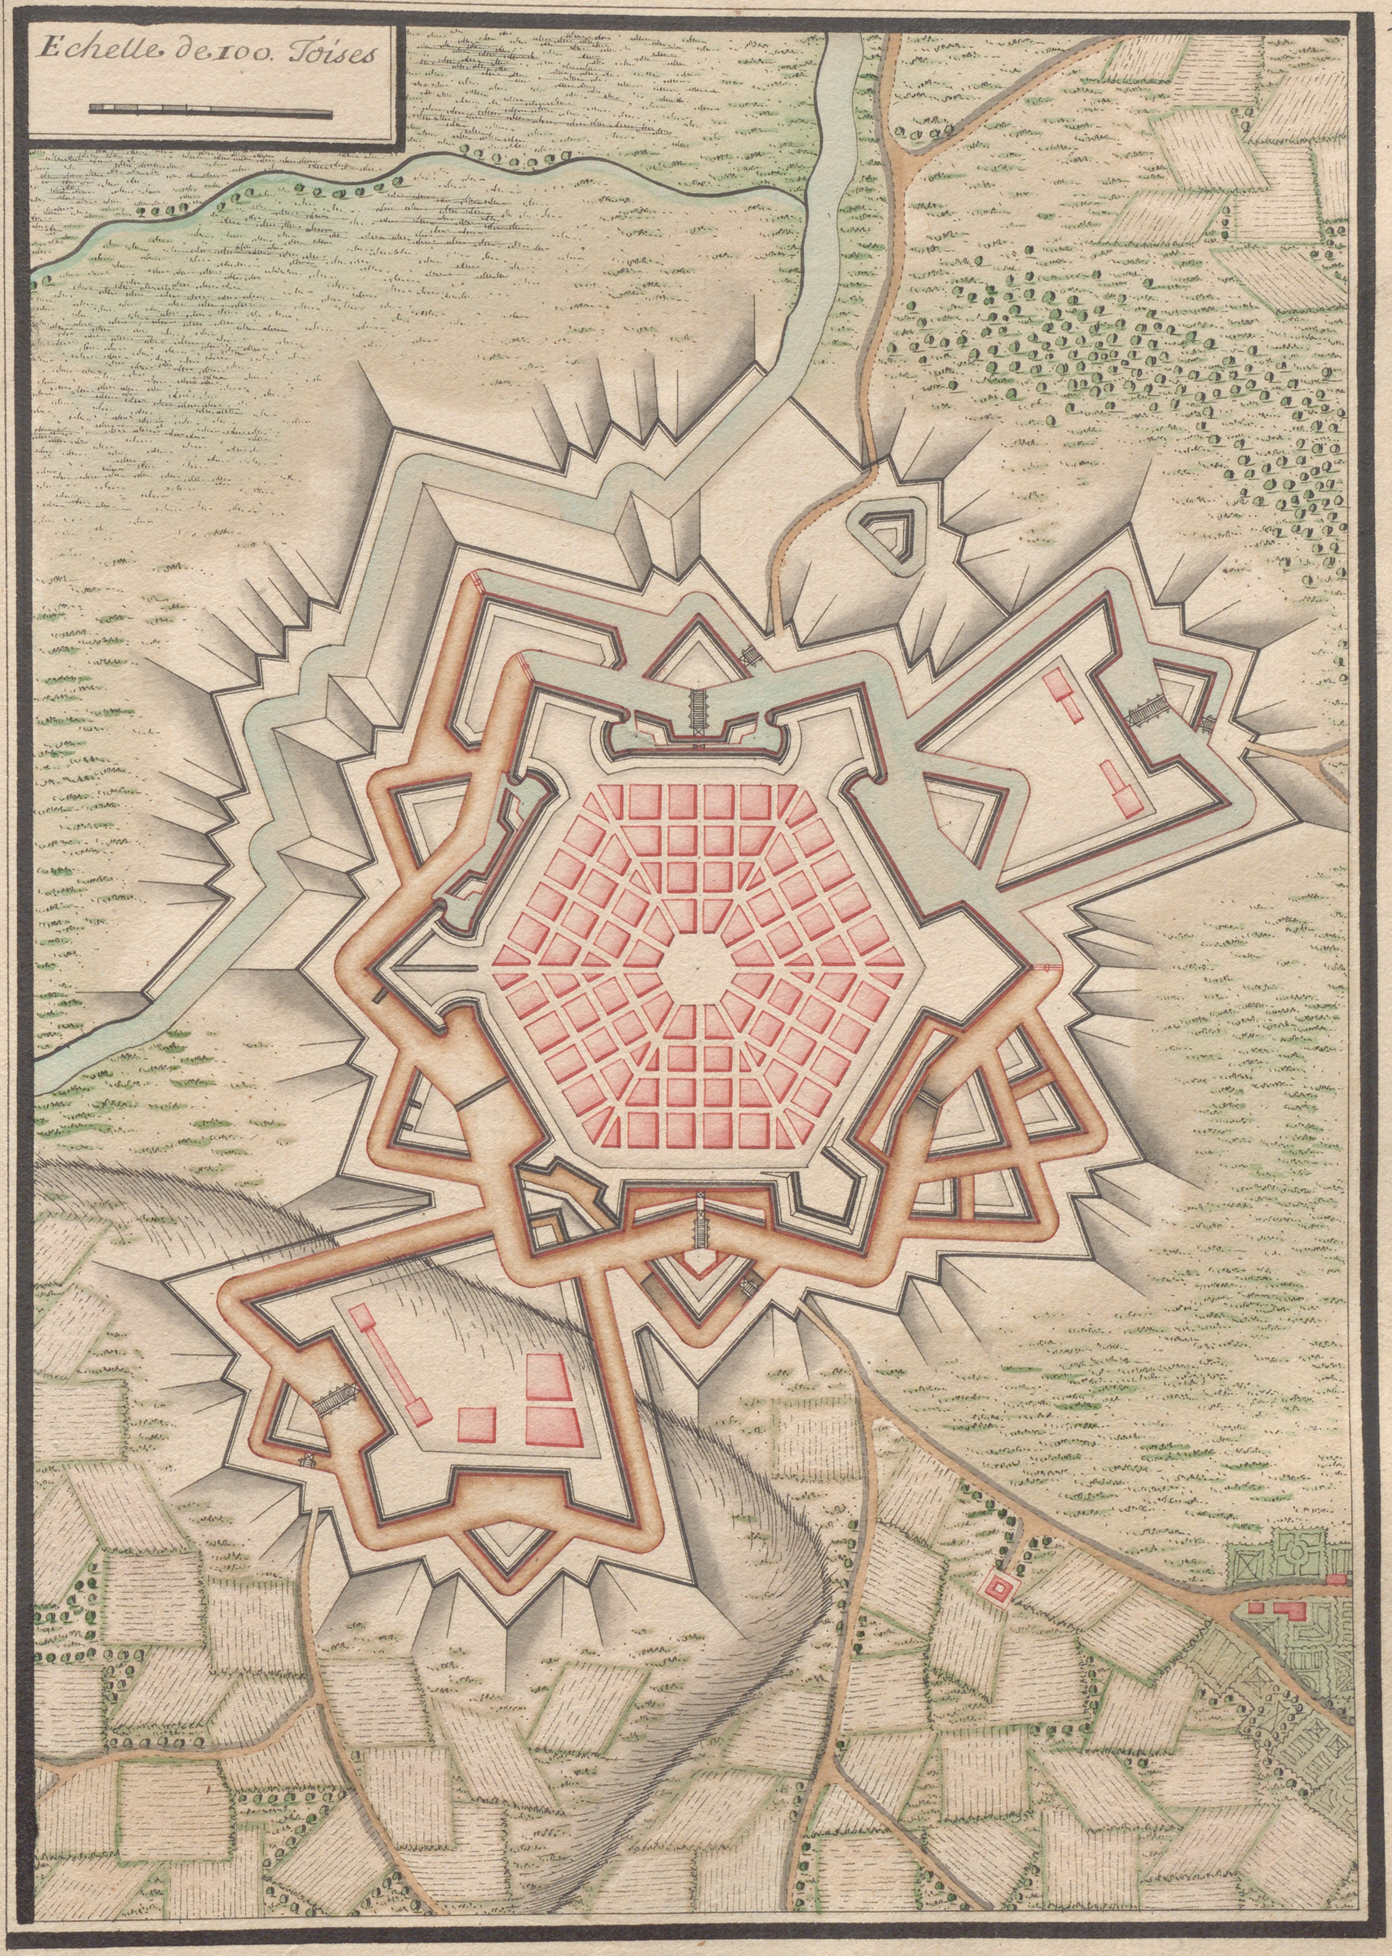 Hand illustrated drawing of a plan for a fortified settlement.